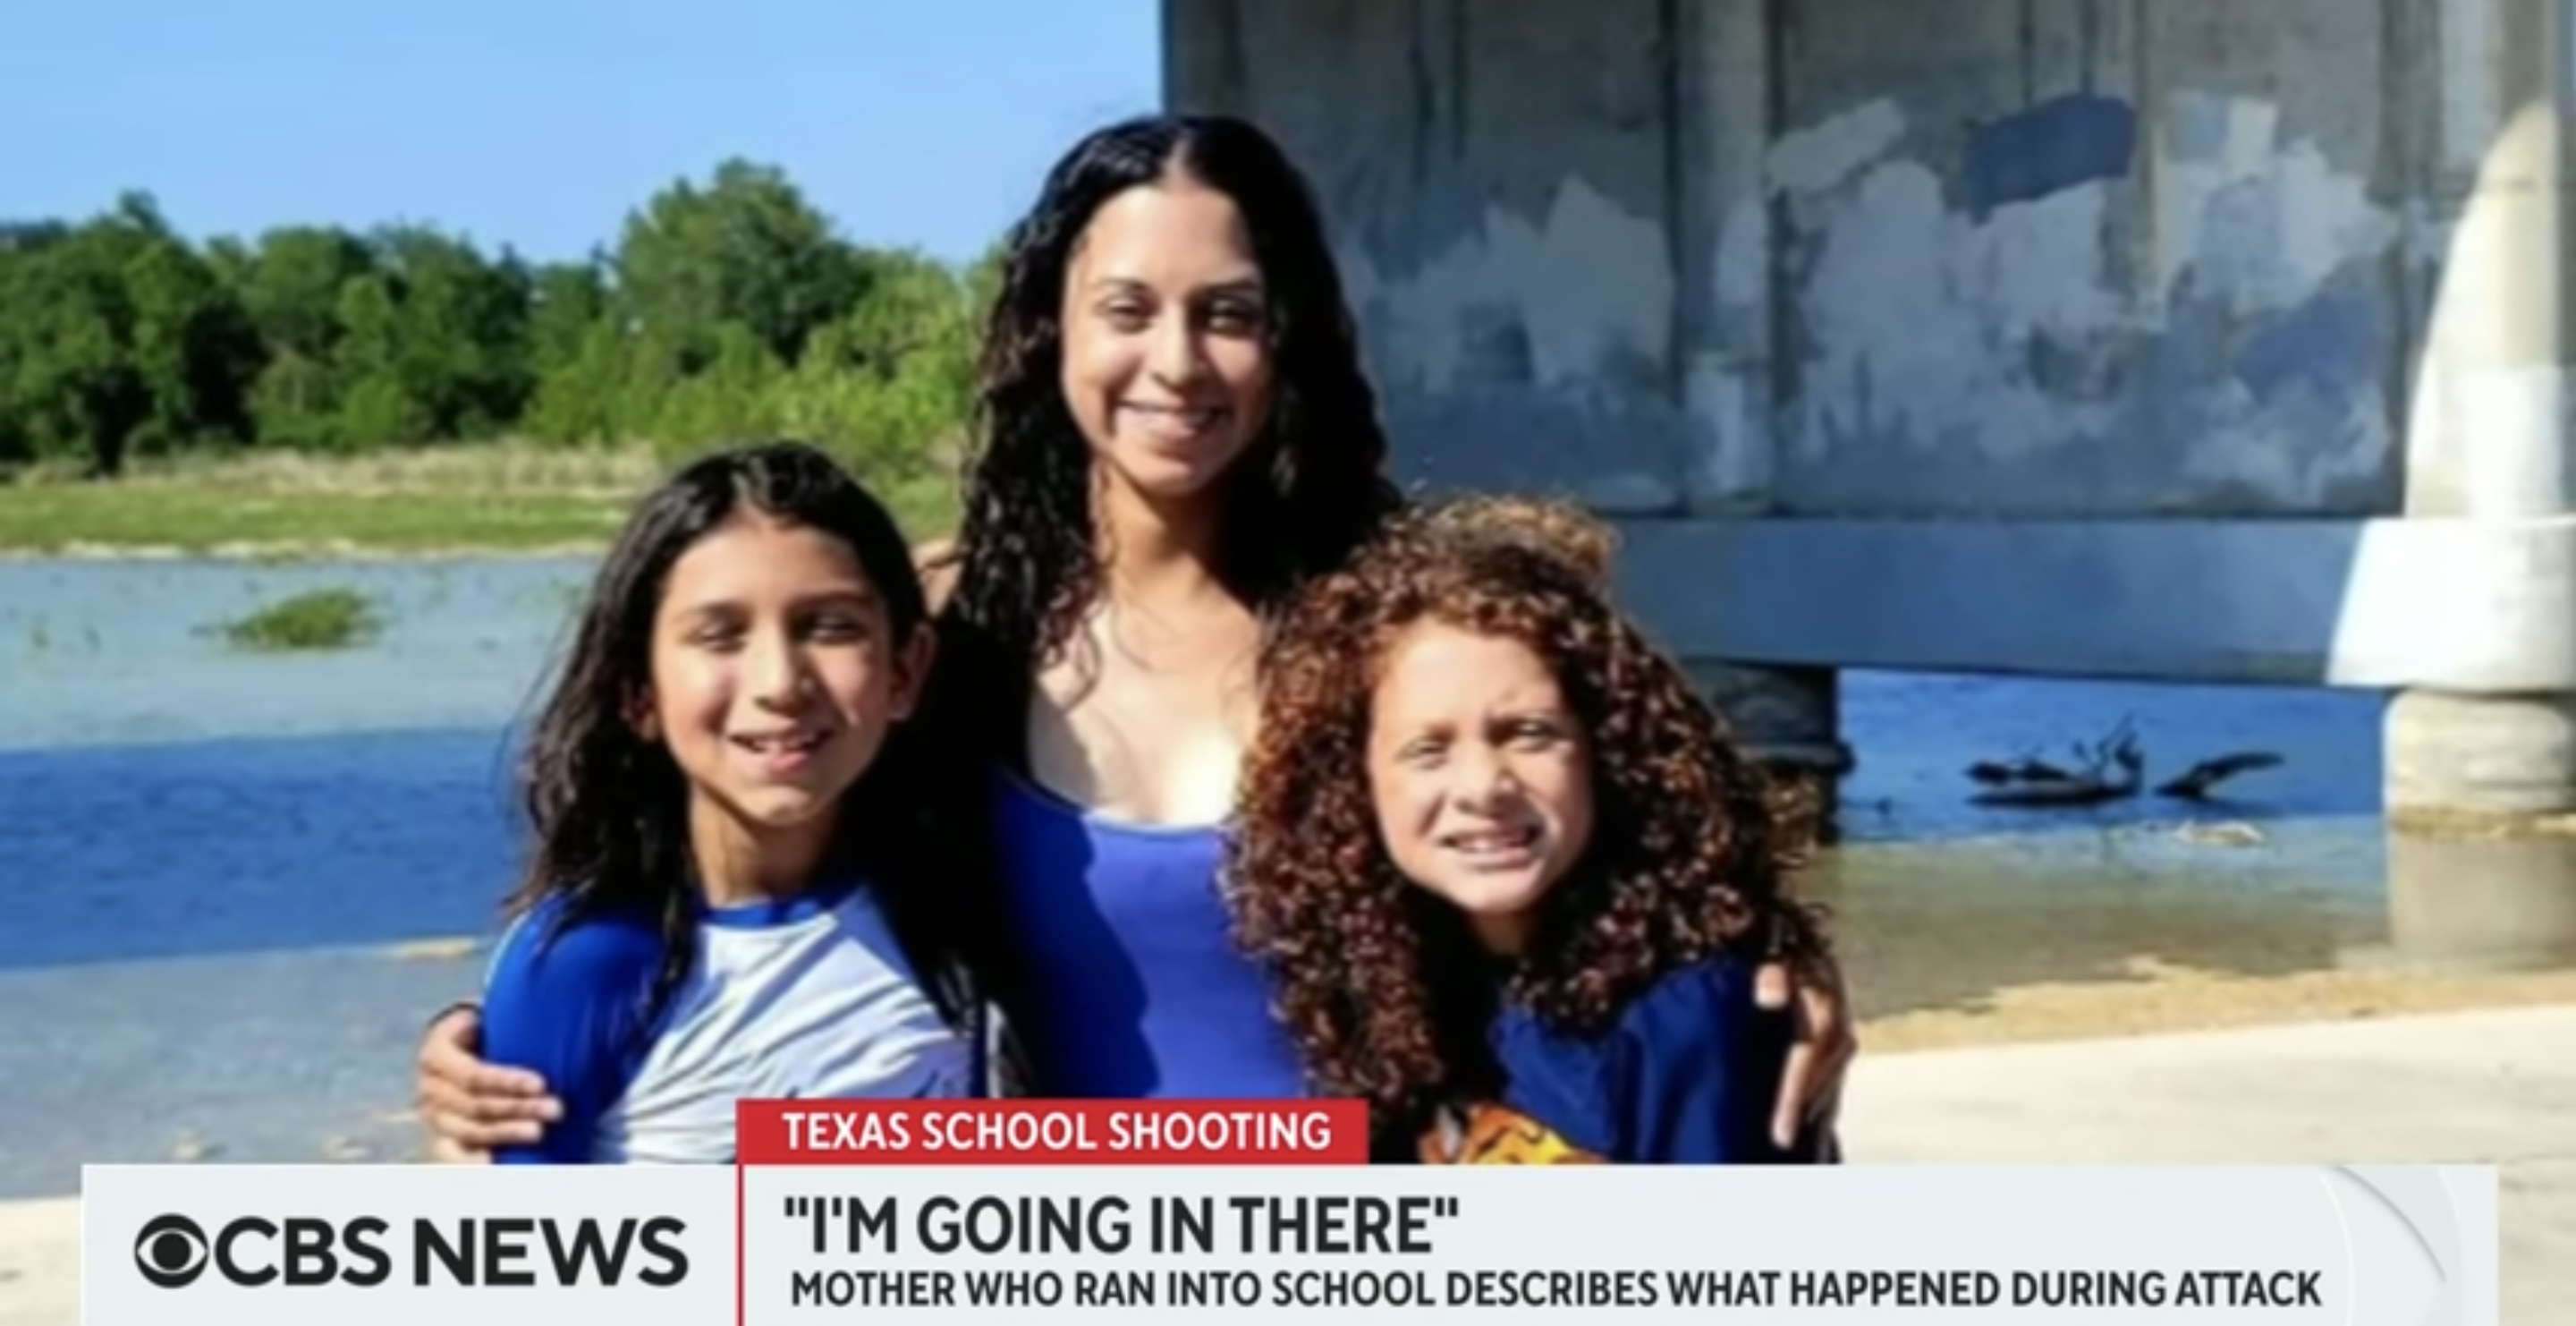 Angeli Gómez speaks to CBS News while embracing two children